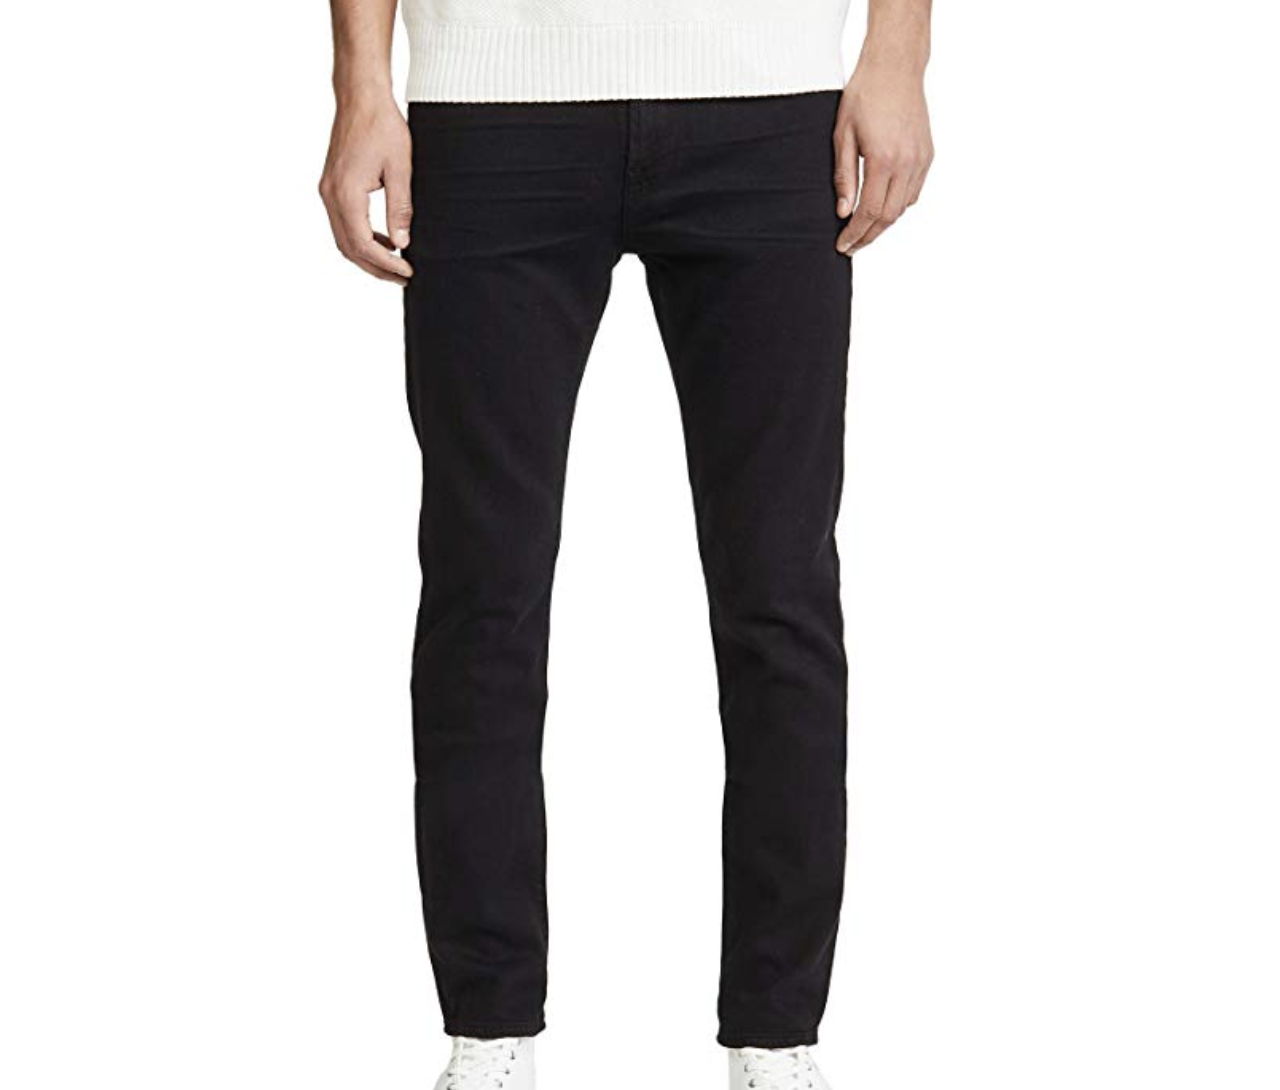 7 For All Mankind Men's Paxtyn Jeans in Annex Black Wash